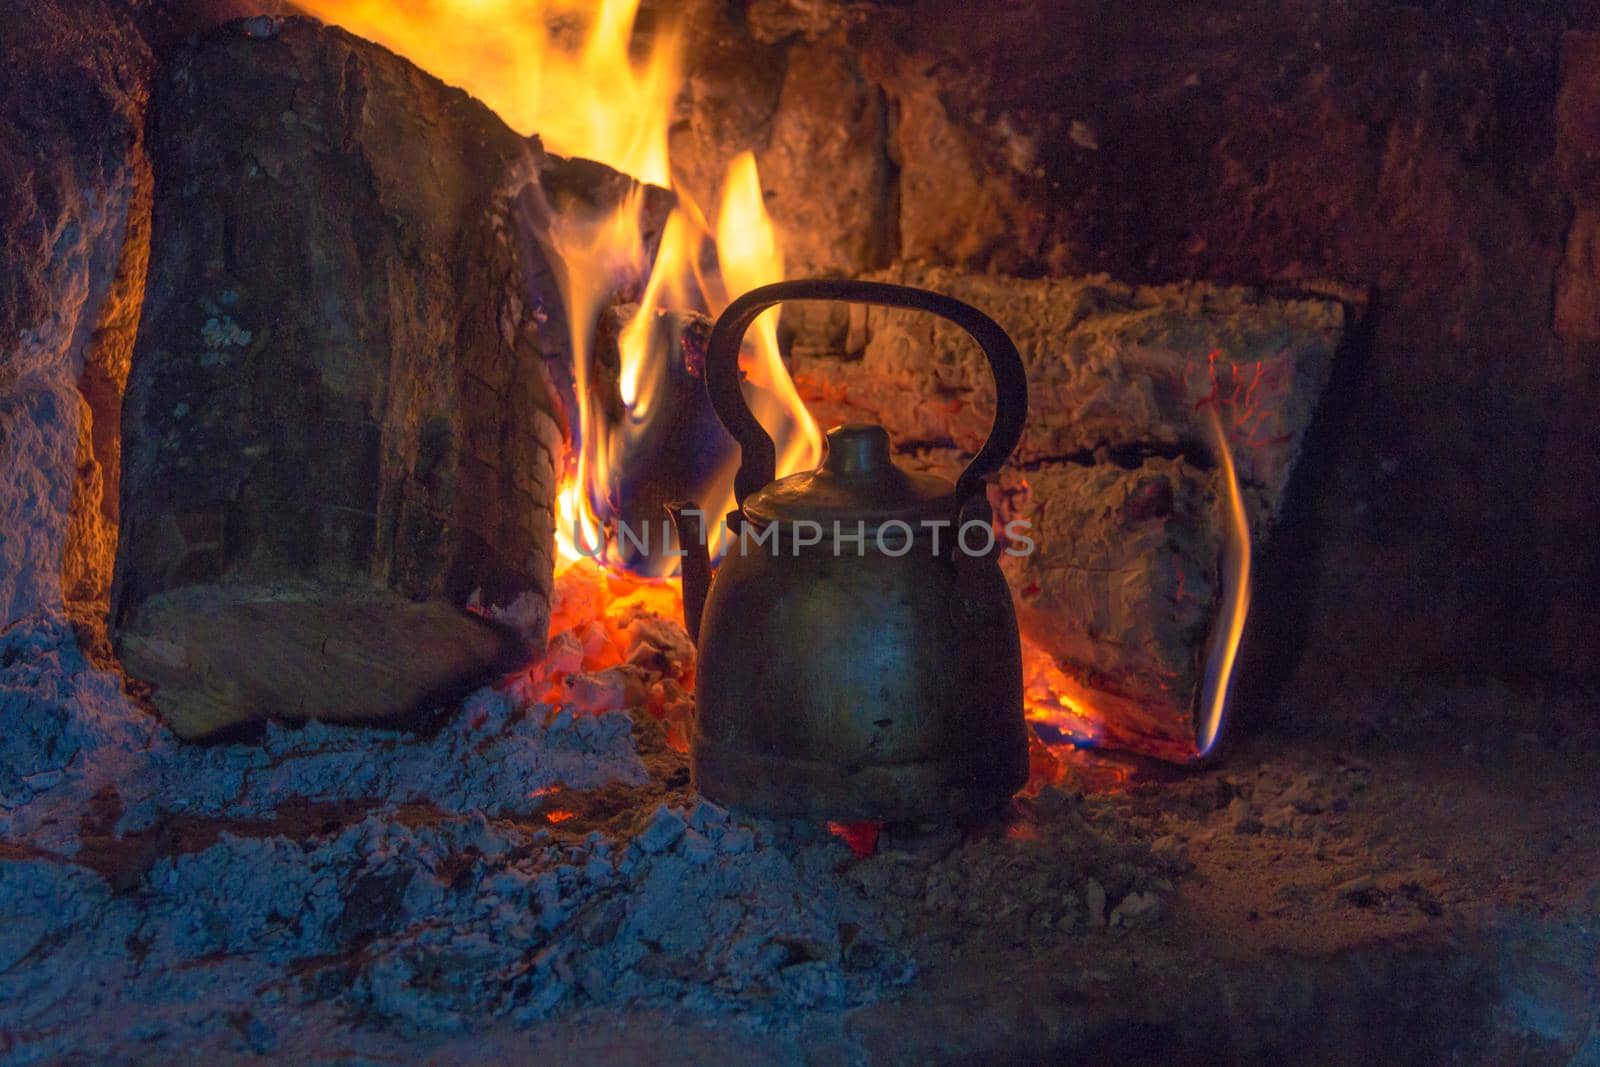 kettle on the firewood to heat the mate water in the Argentine countryside by GabrielaBertolini